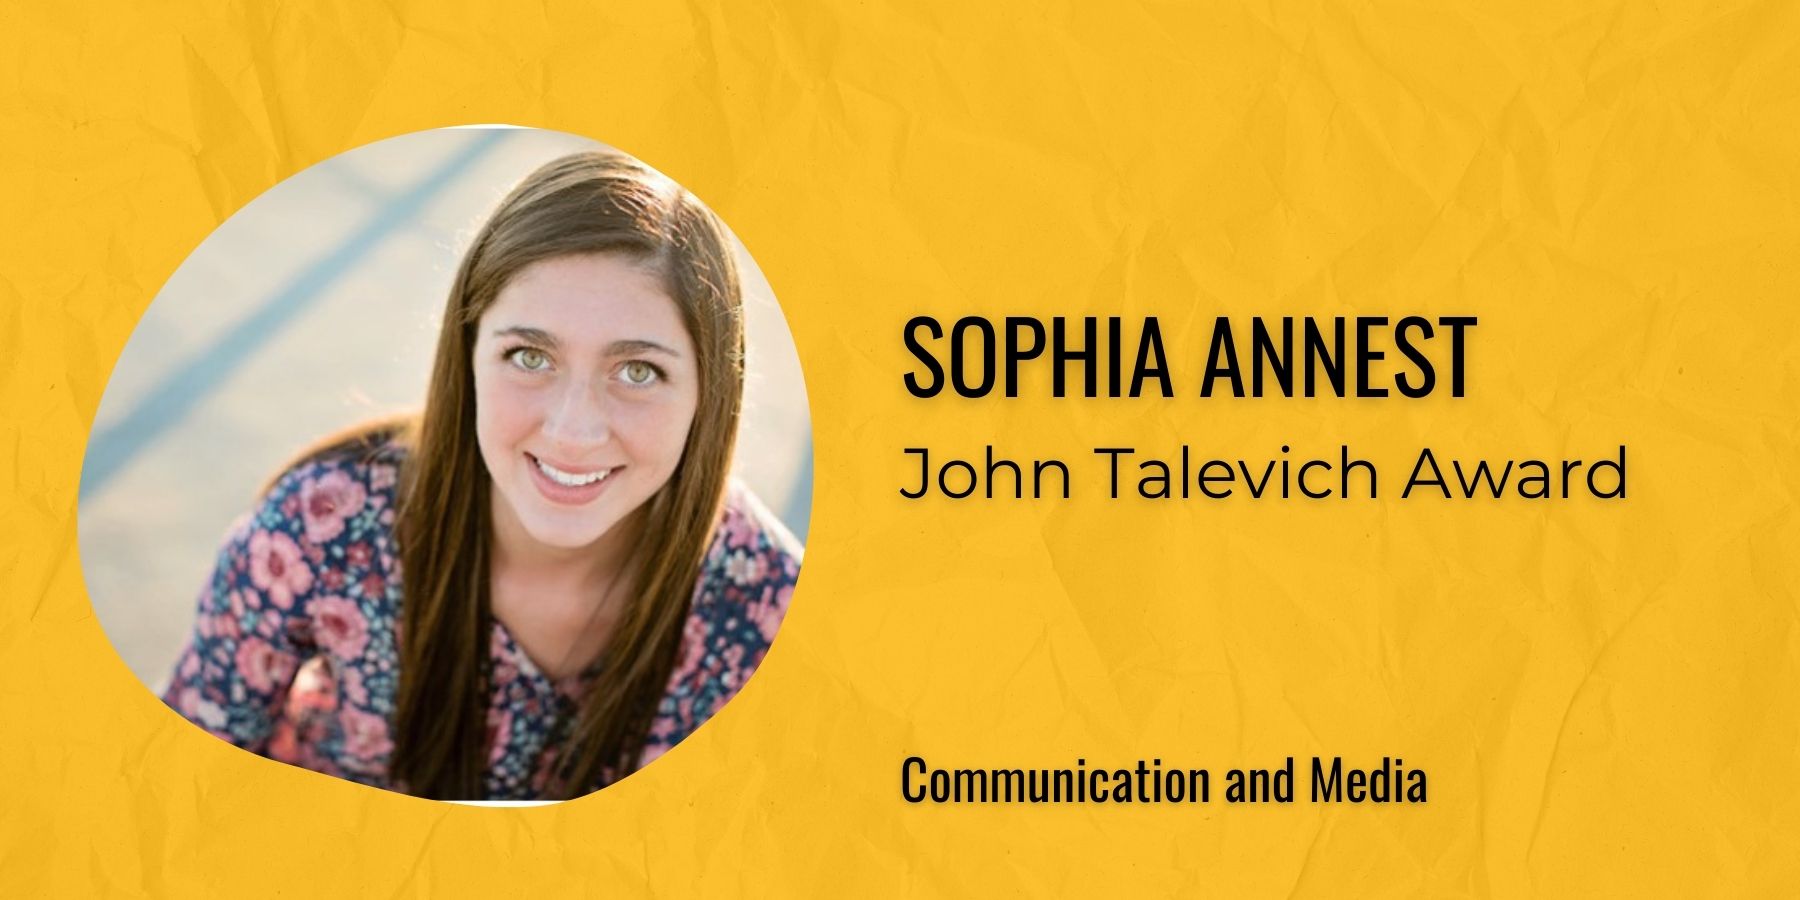 Image of Sophia Annest with text: John Talevich Award, Communication and Media